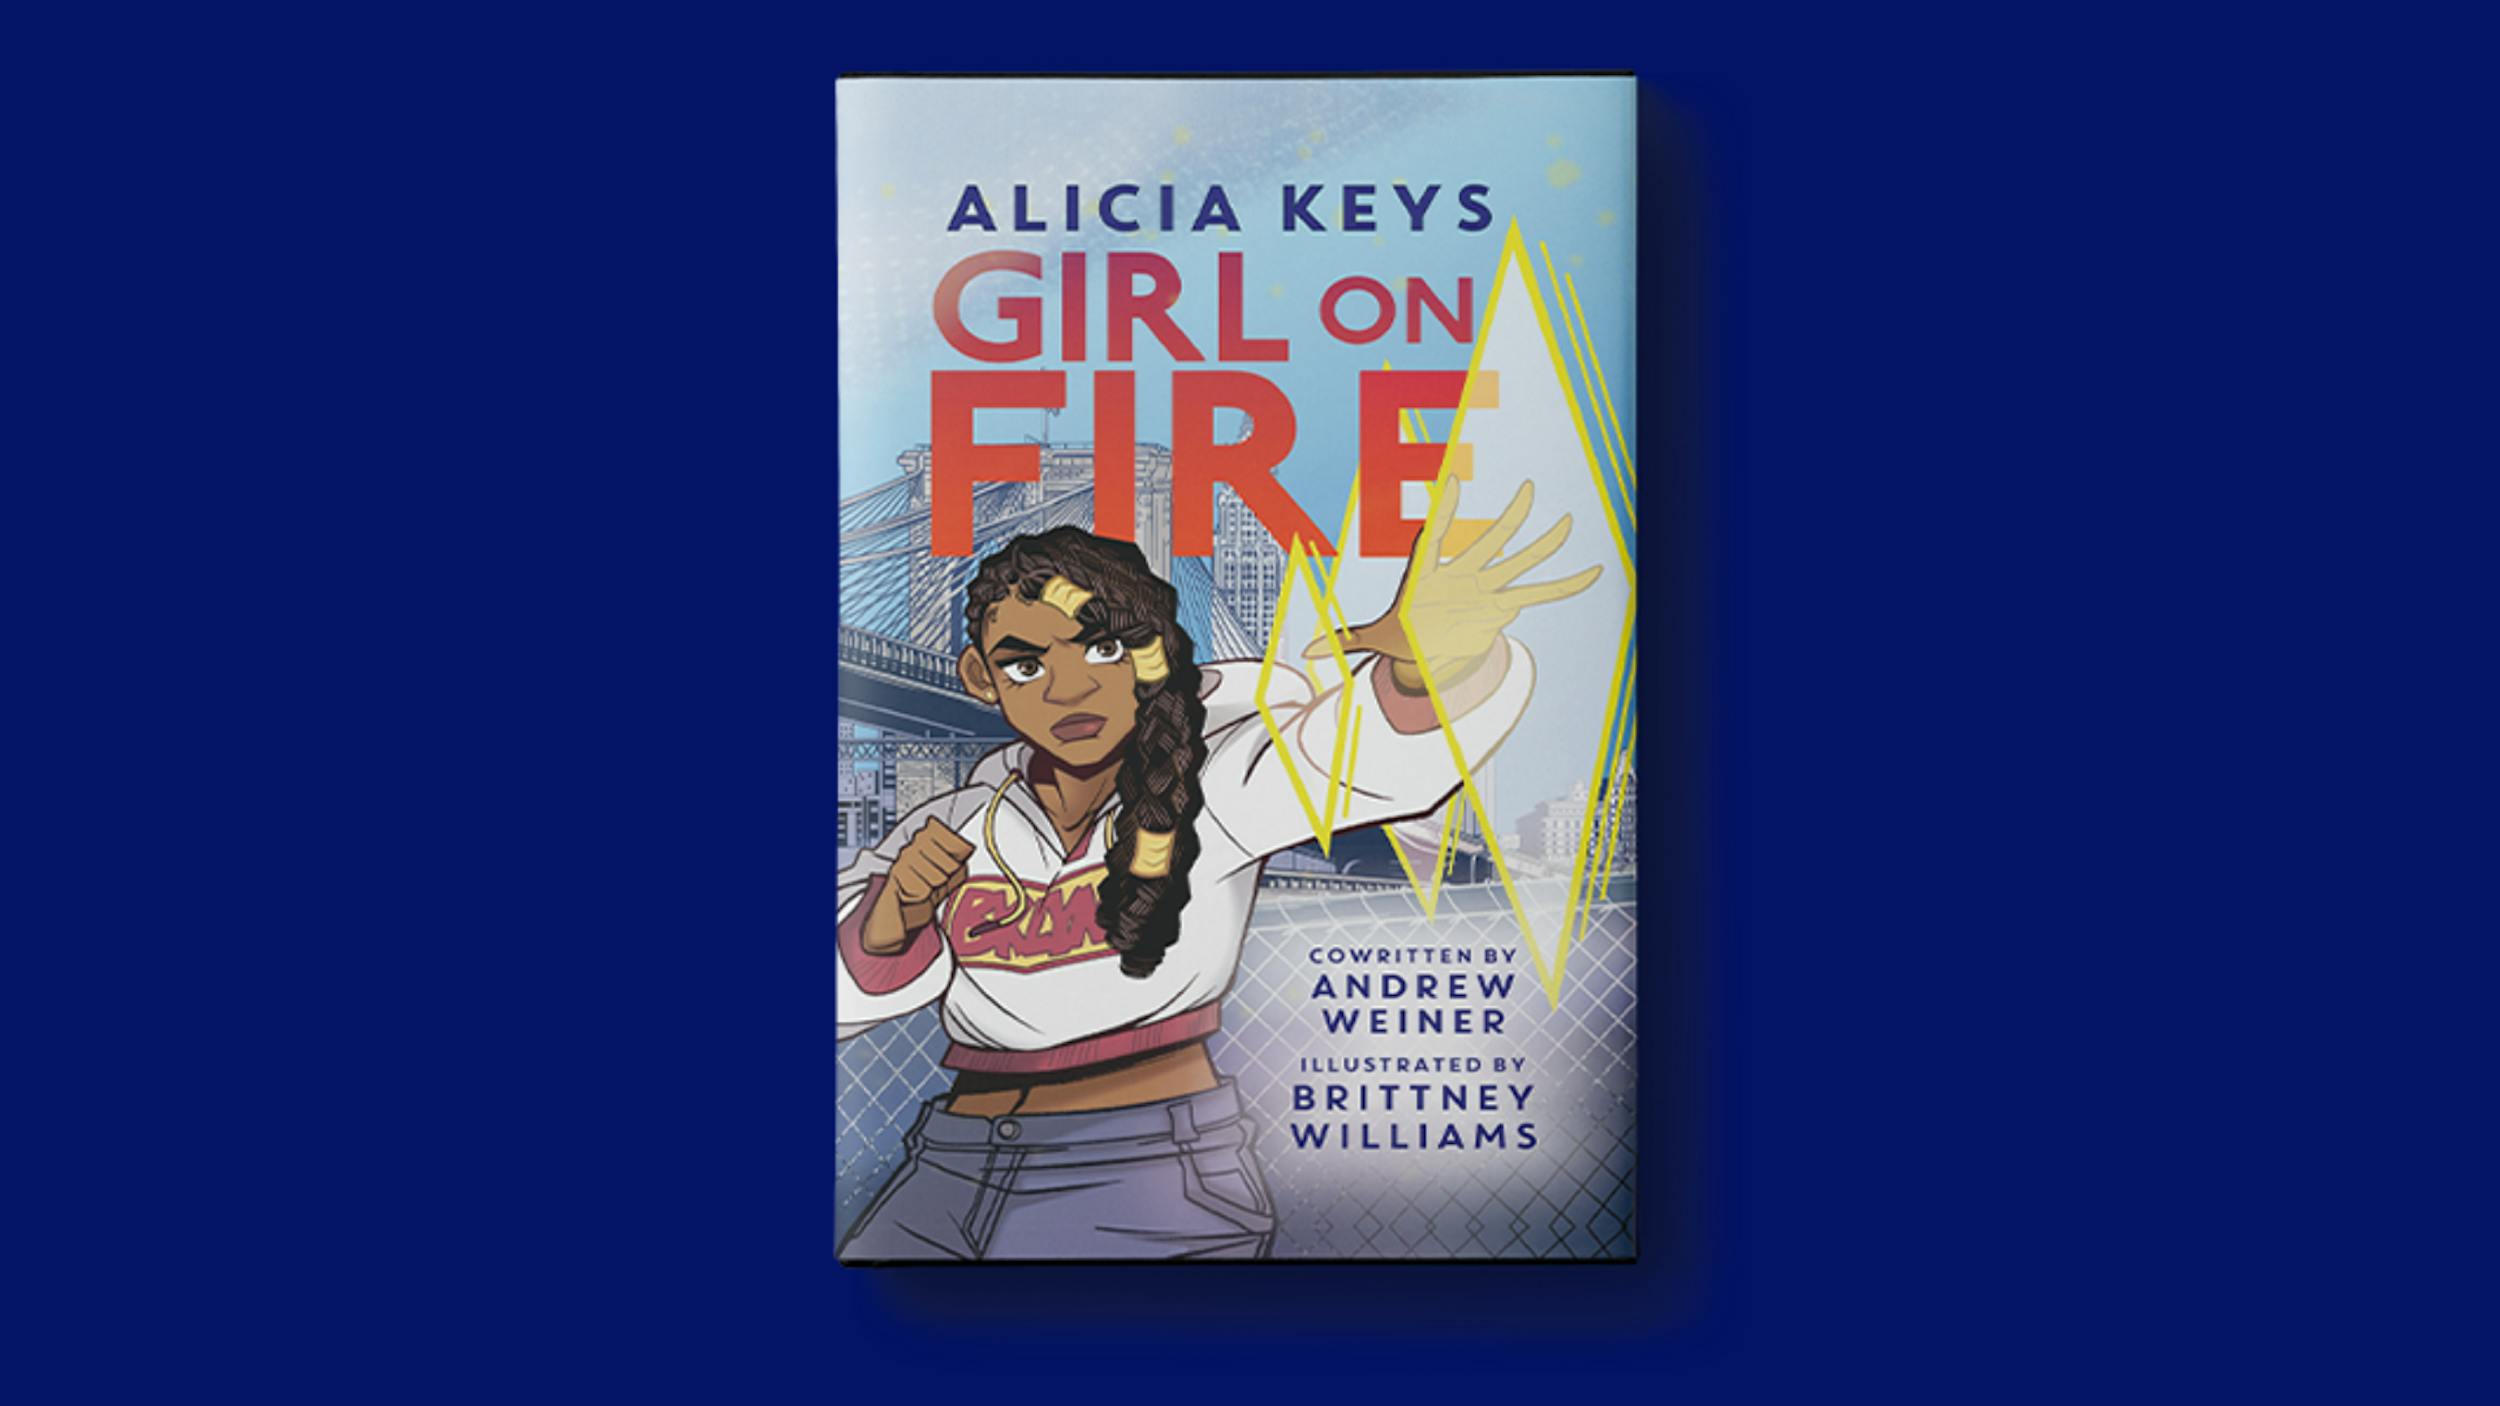 Alicia Keys Releases New Young Adult Graphic Novel “Girl on Fire”